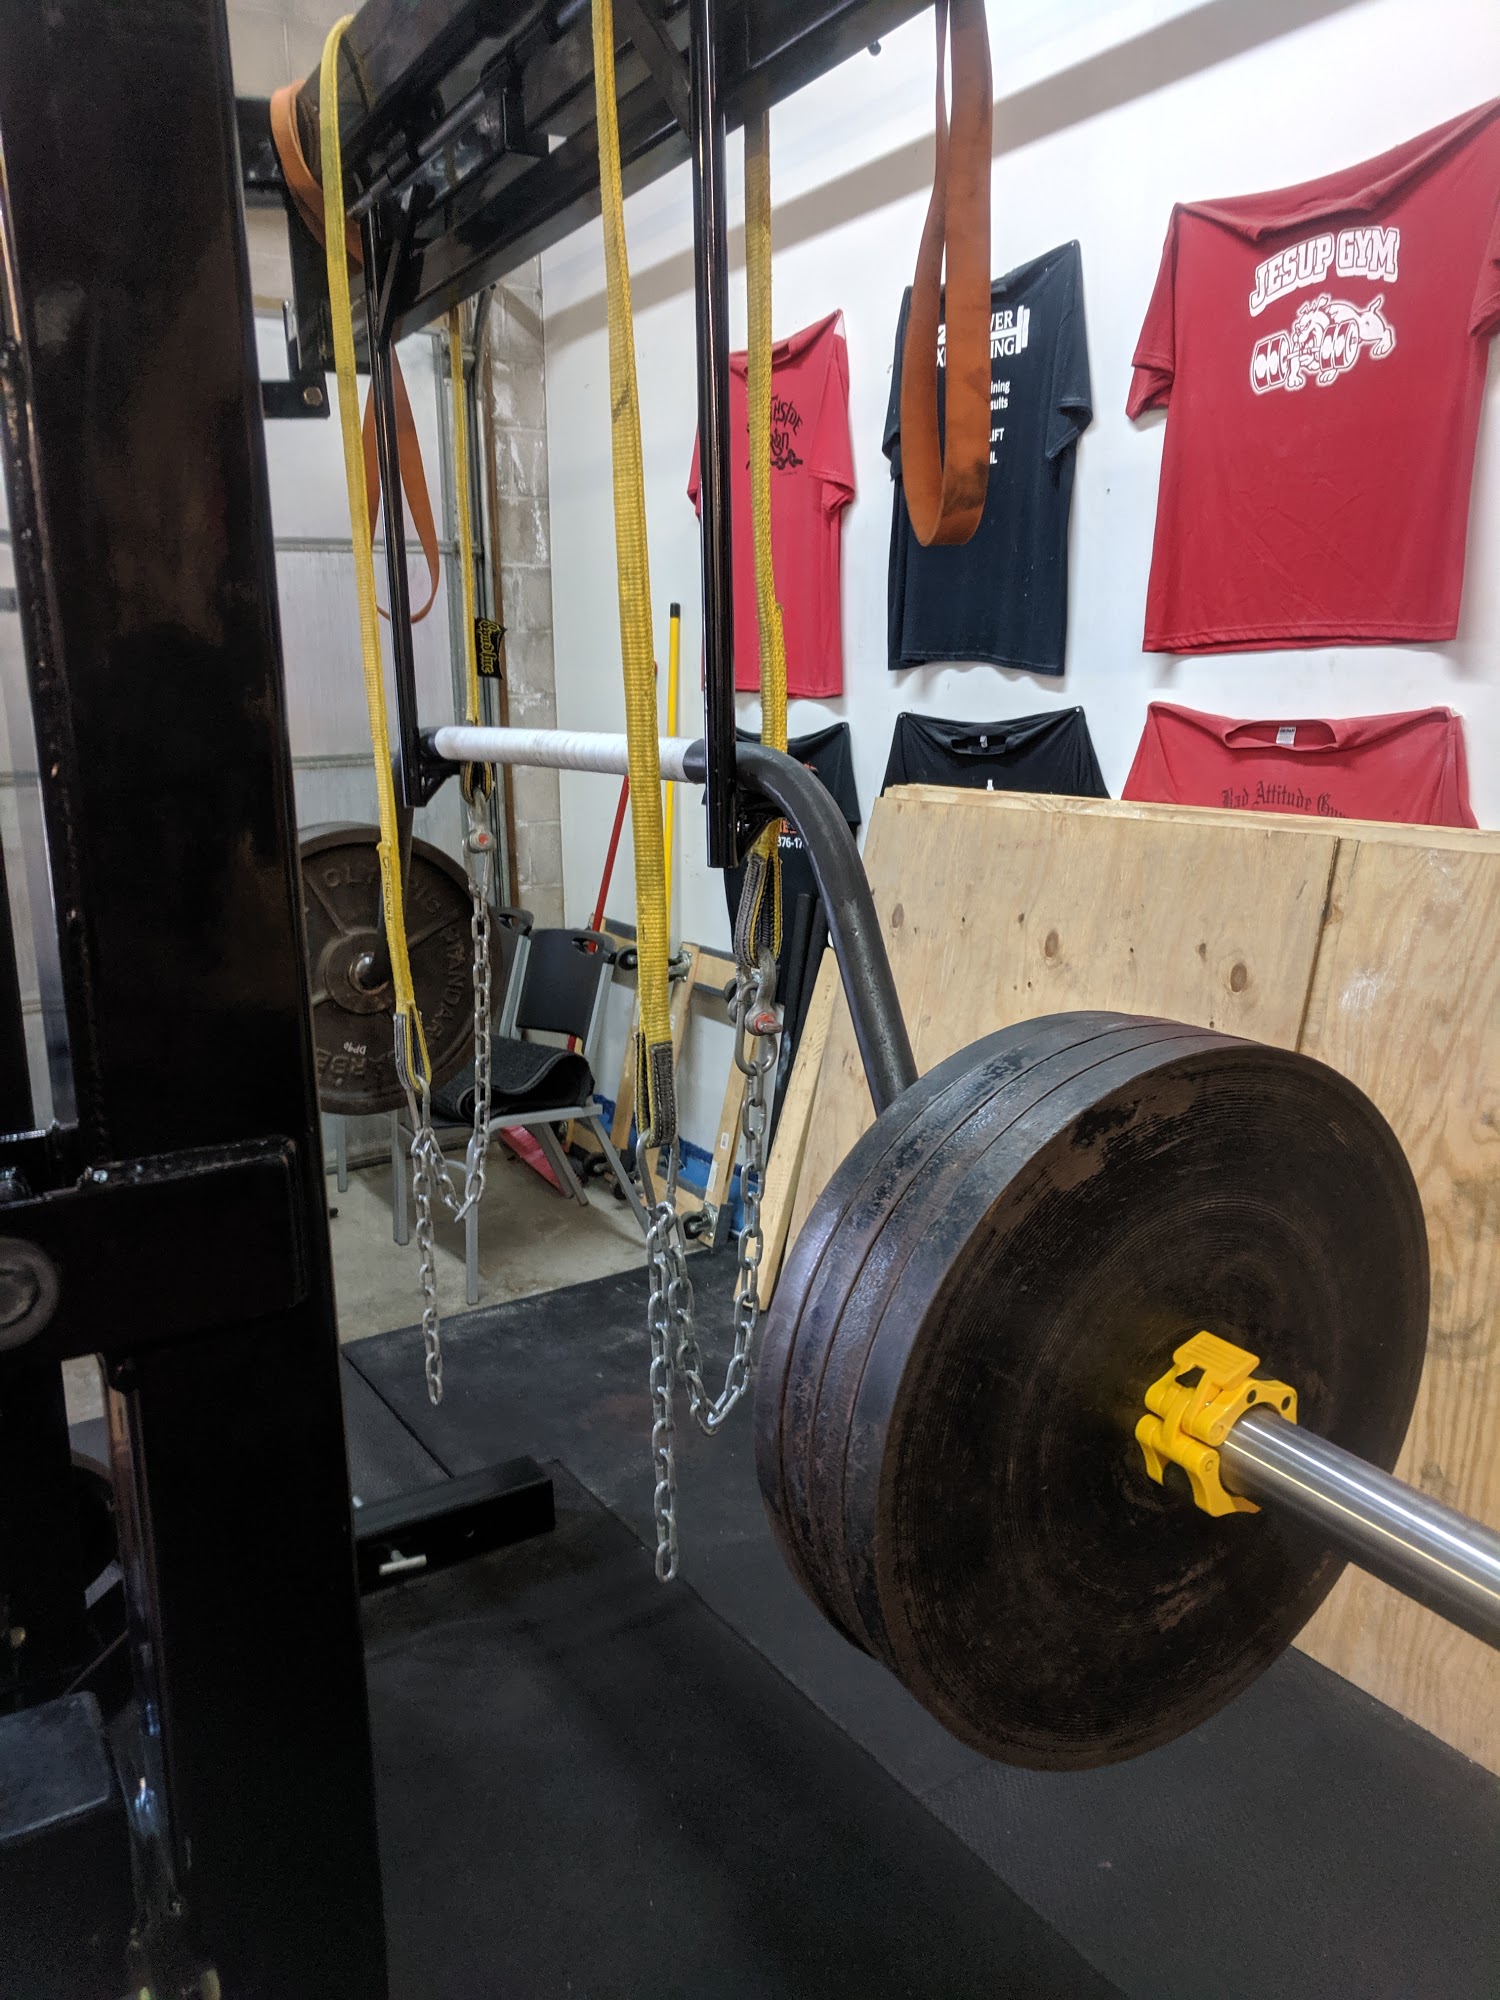 Twin cities Barbell